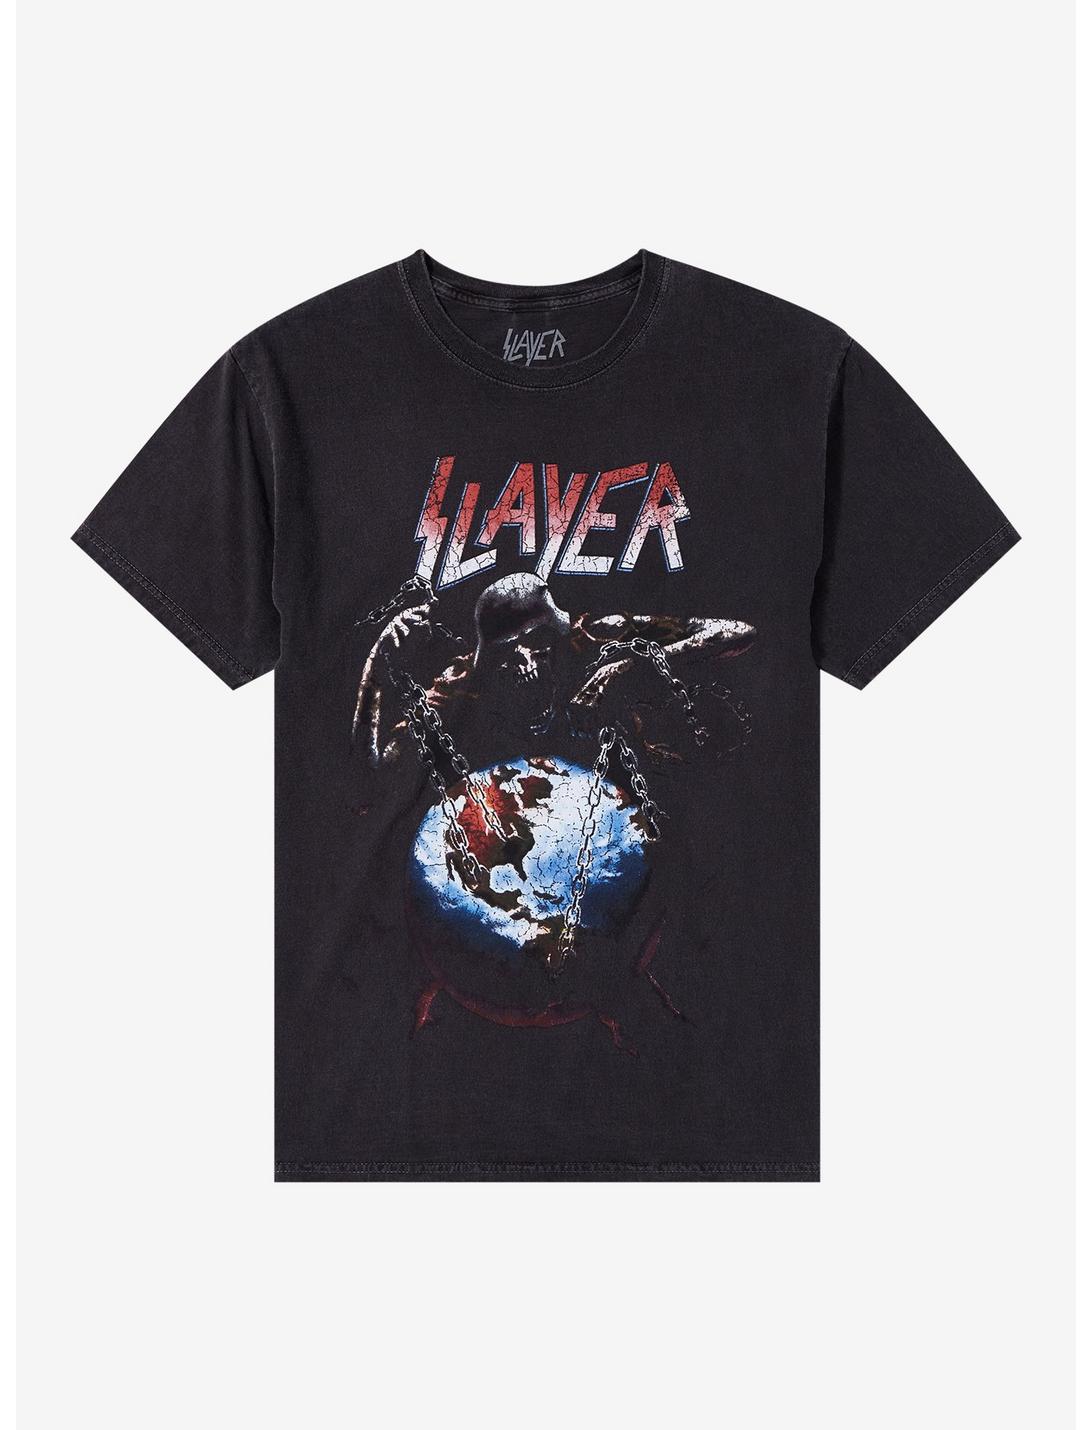 Slayer Chained World Dyed T-Shirt, CHARCOAL, hi-res